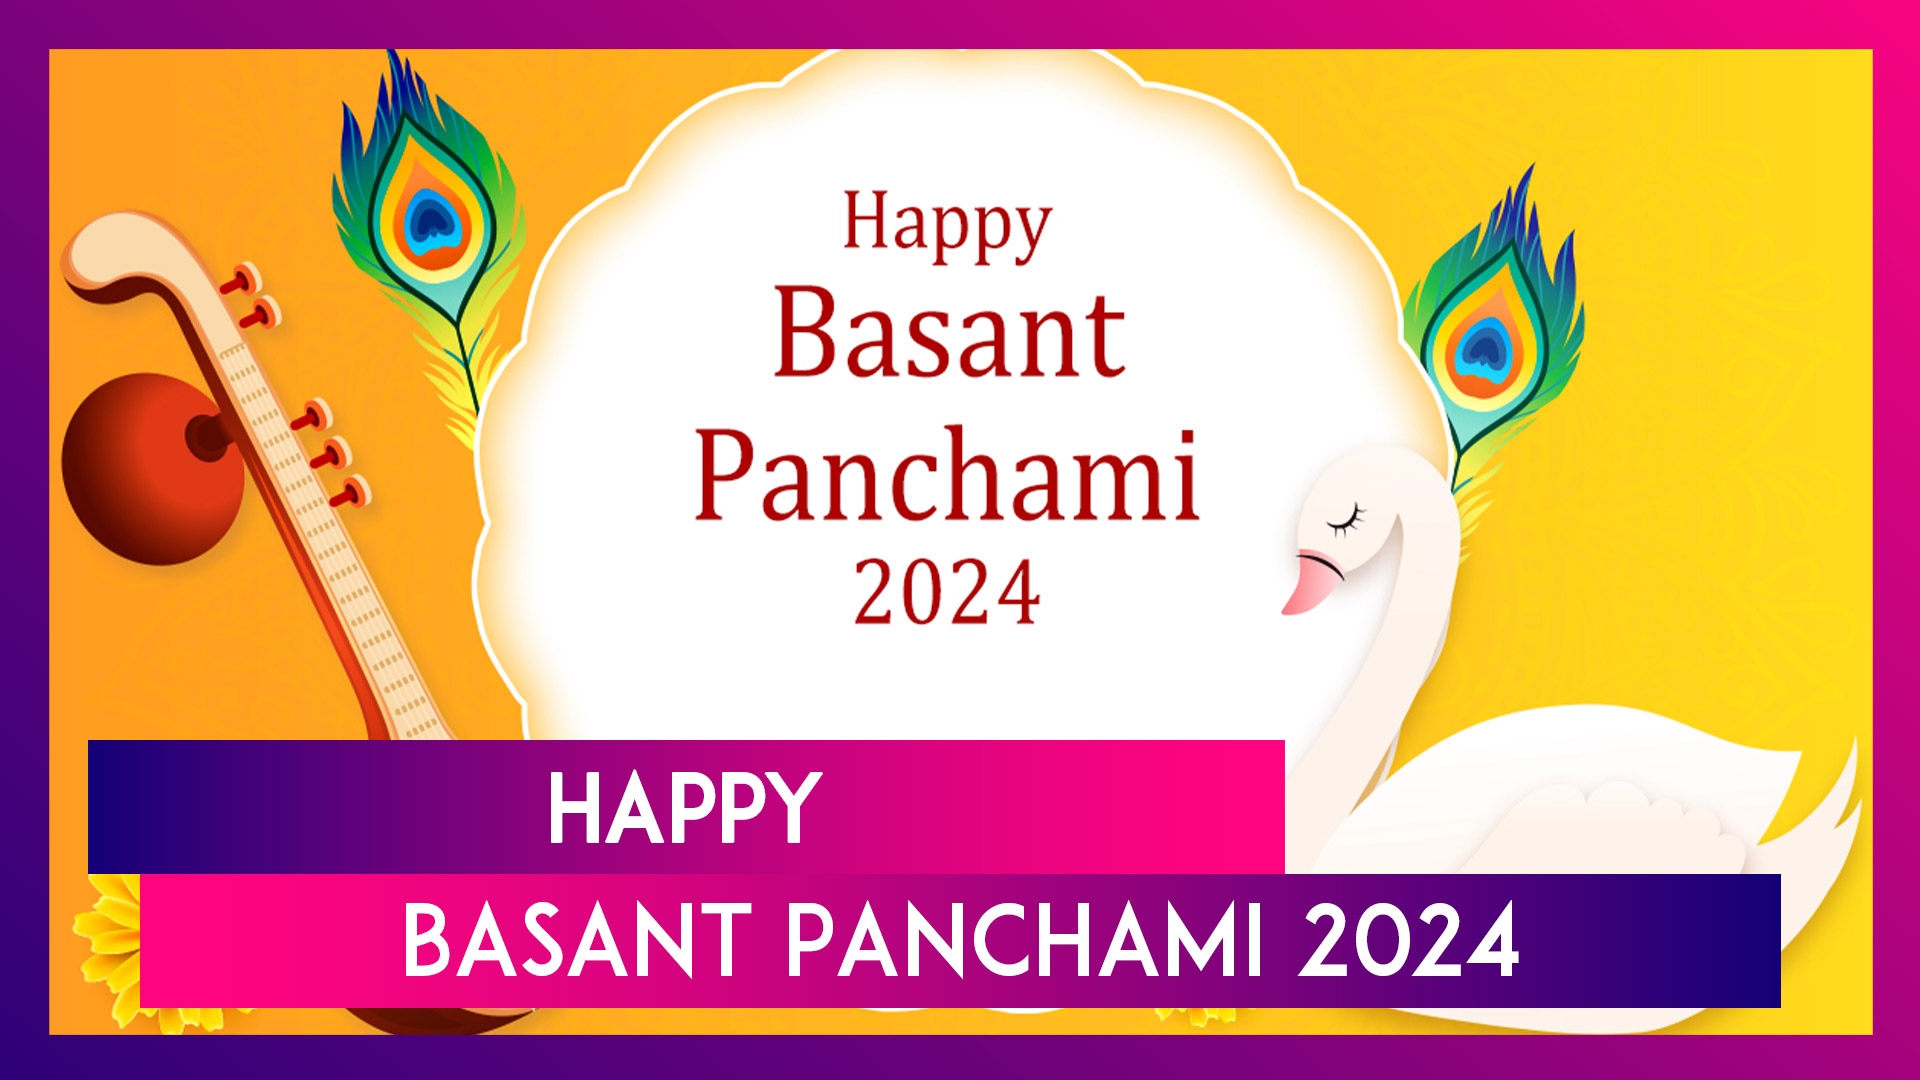 Happy Basant Panchami 2024 Messages: Celebrate Saraswati Puja With Greetings, Images And Quotes